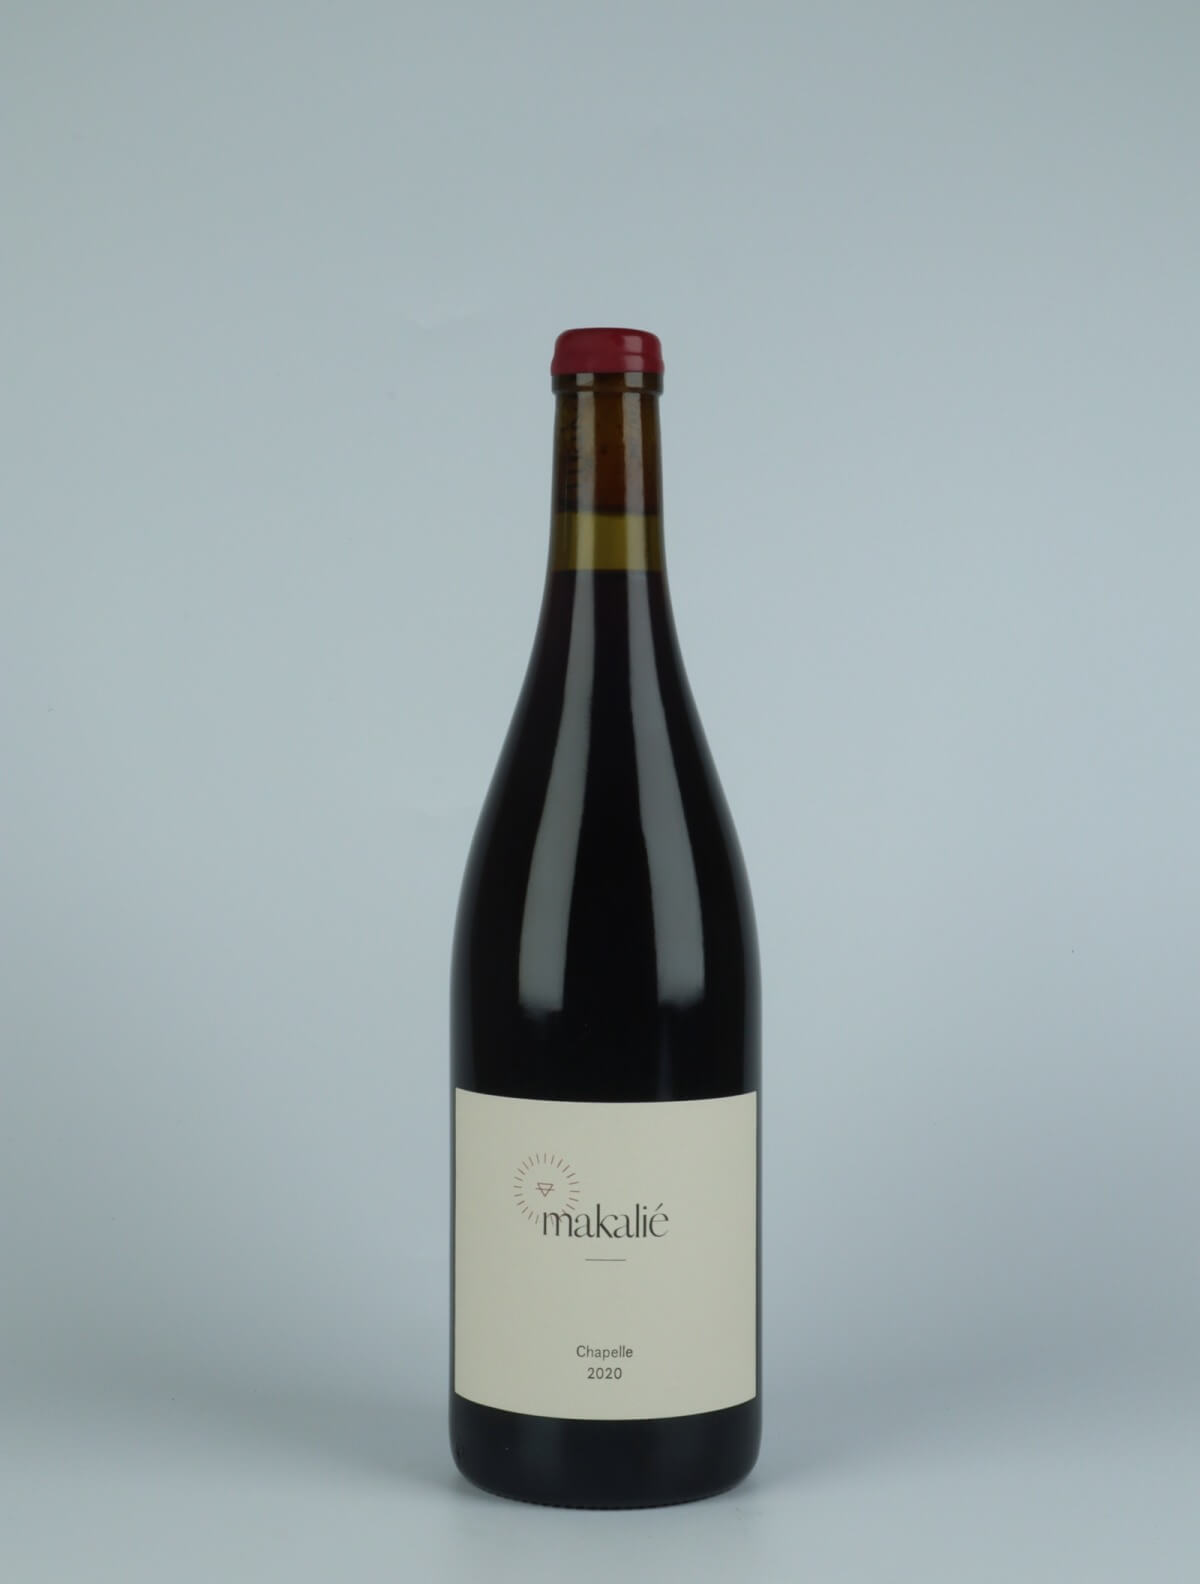 A bottle 2020 Chapelle Red wine from Makalié, Baden in Germany